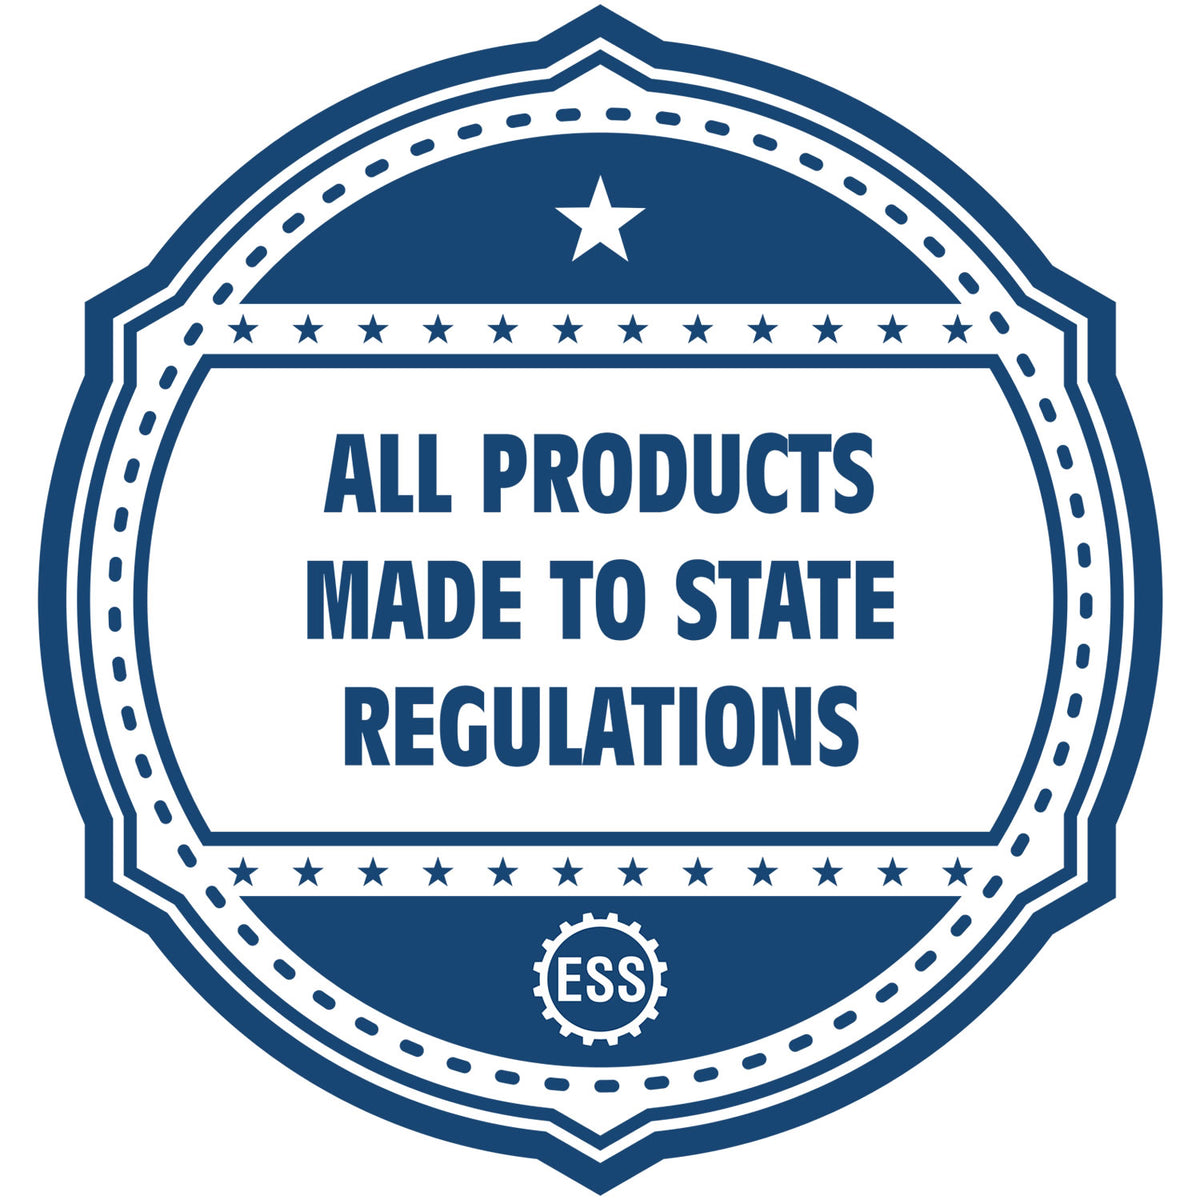 An icon or badge element for the Slim Pre-Inked Vermont Professional Engineer Seal Stamp showing that this product is made in compliance with state regulations.